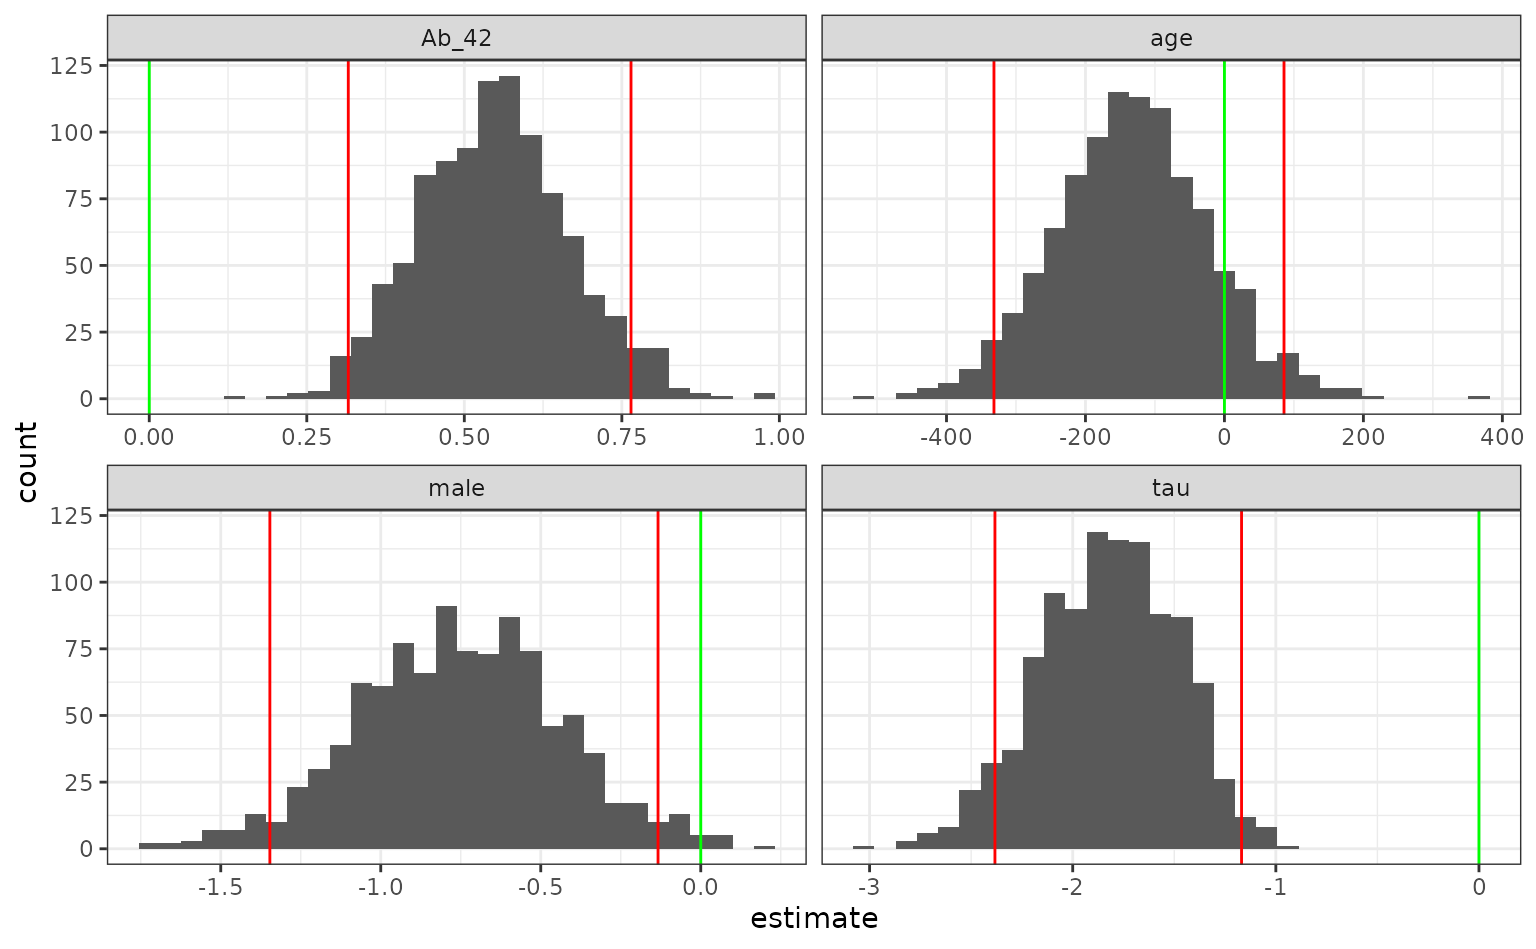 Four histograms for the distribution of the regression model coefficients, with vertical lines indicating the estimated lower and upper interval bounds, as well as vertical lines for a coefficient value of 0. For age, the interval encloses 0, for the other variables it does not.